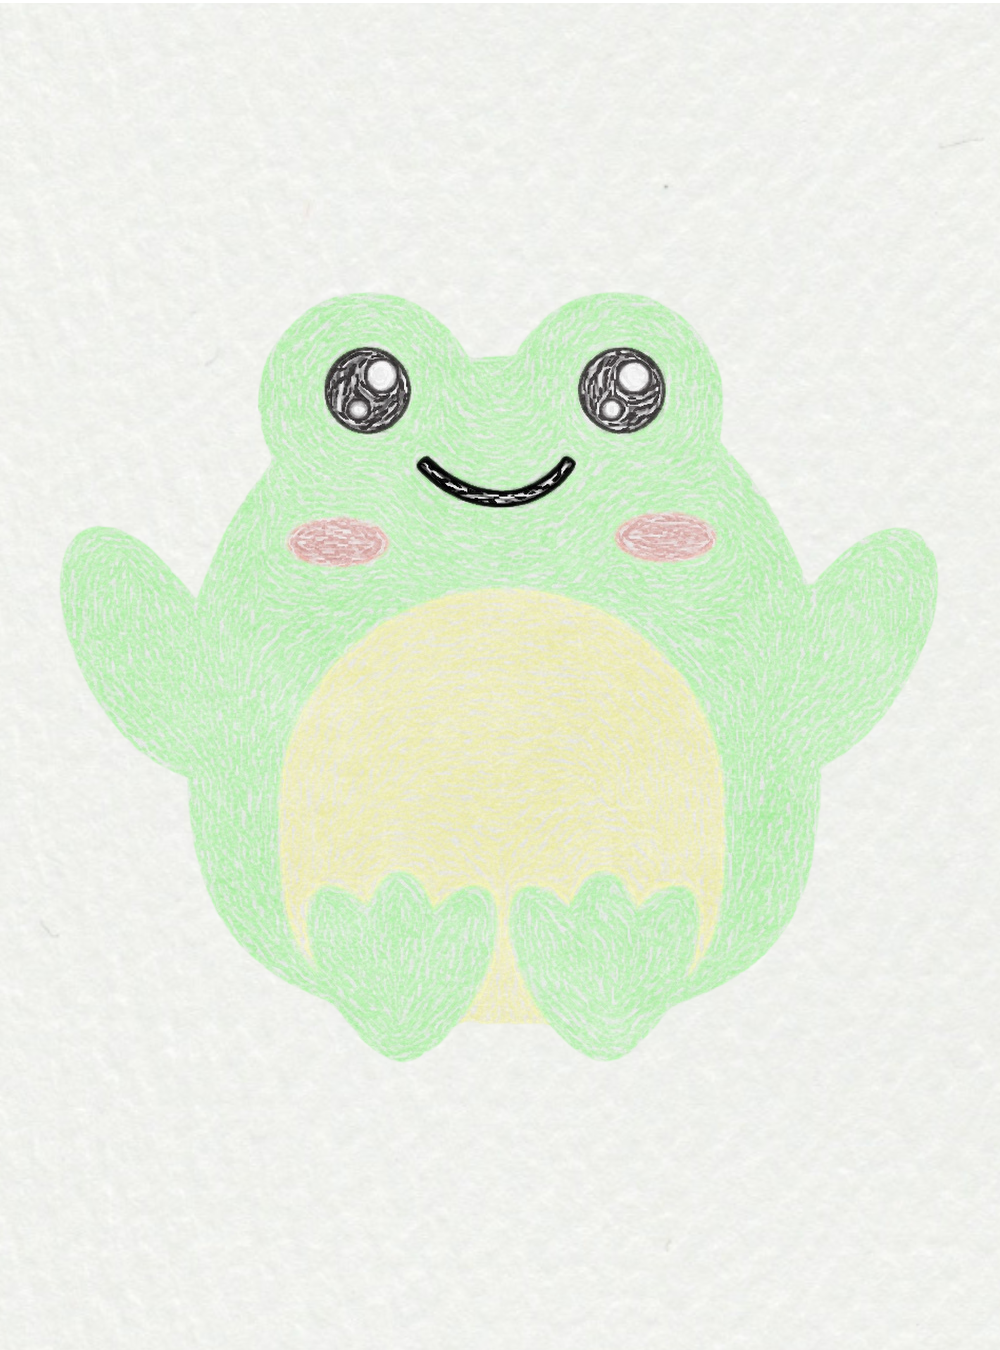 Easy Cute Small Animal Drawing Ideas: Frog 